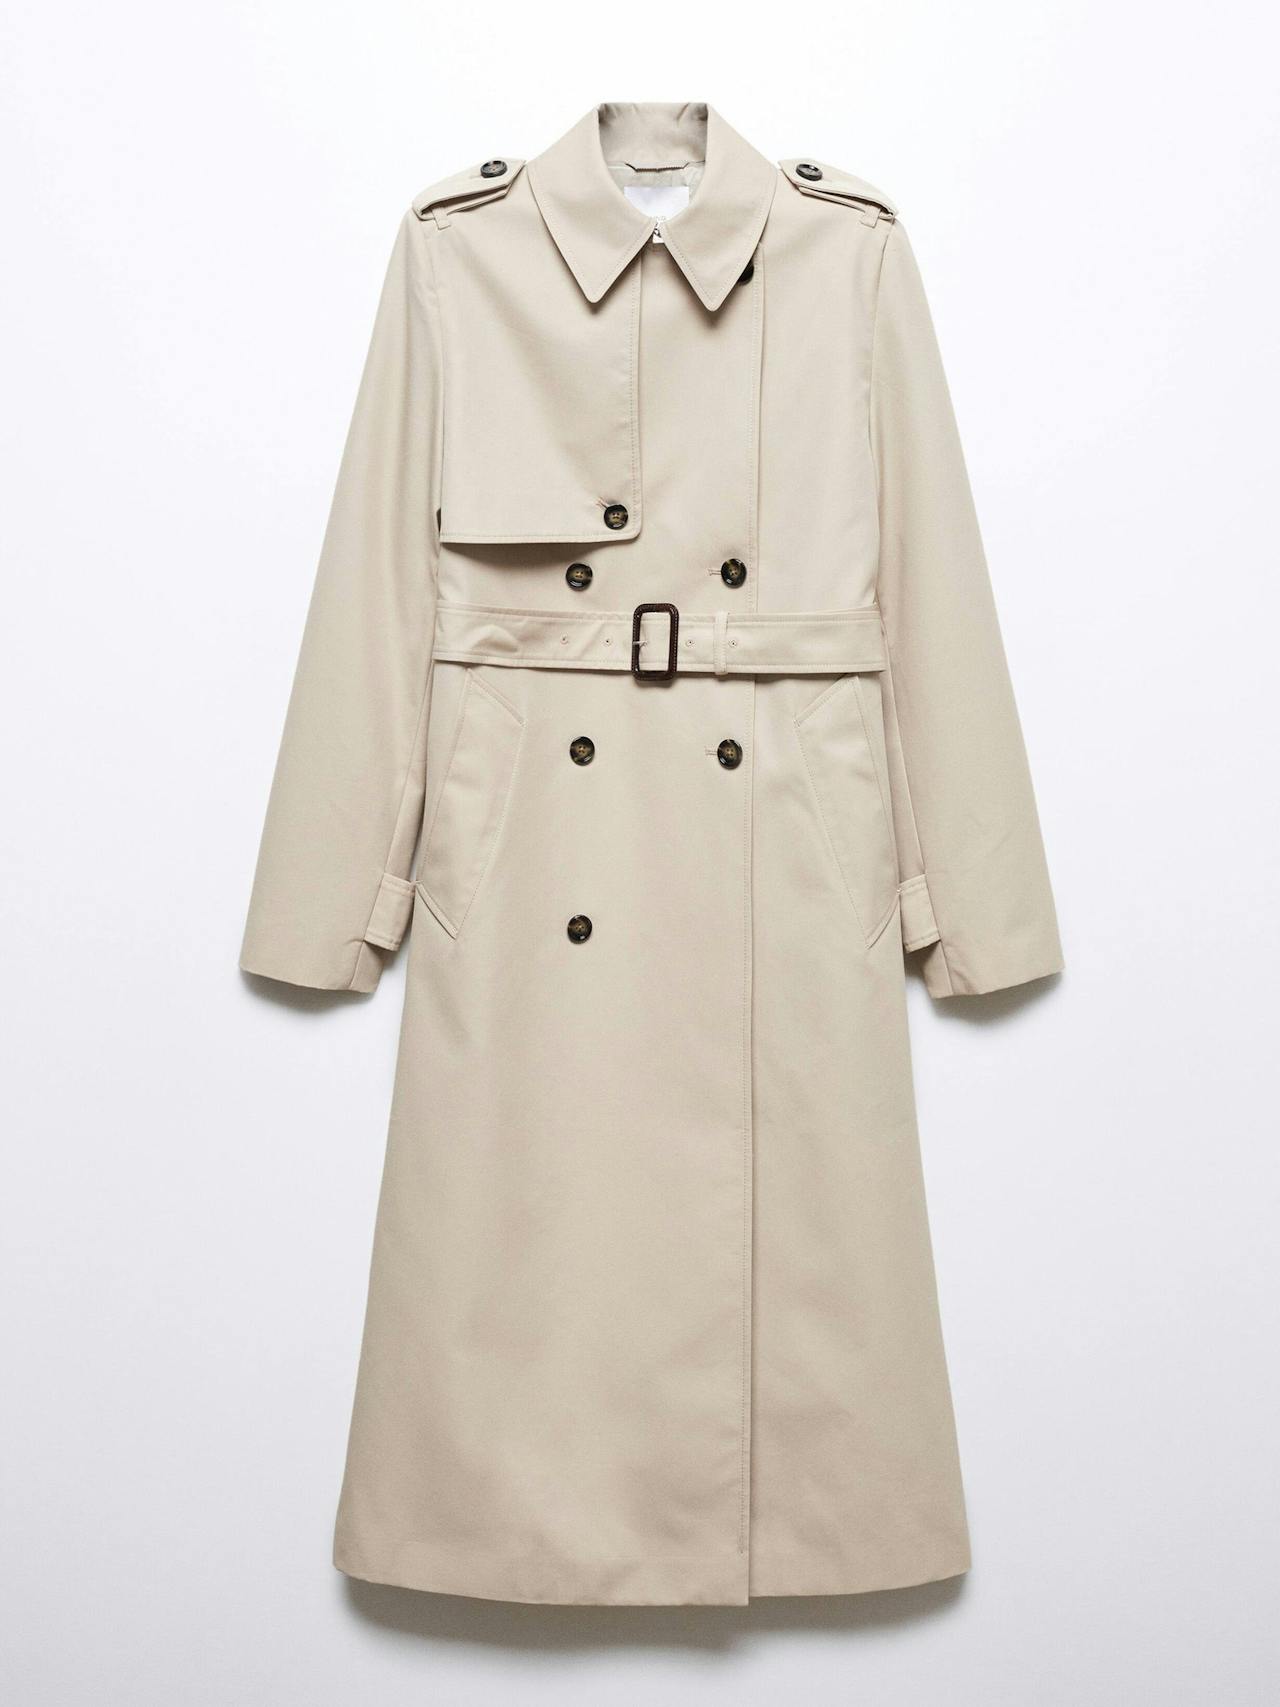 Waterproof double breasted trench coat in Pastel Grey